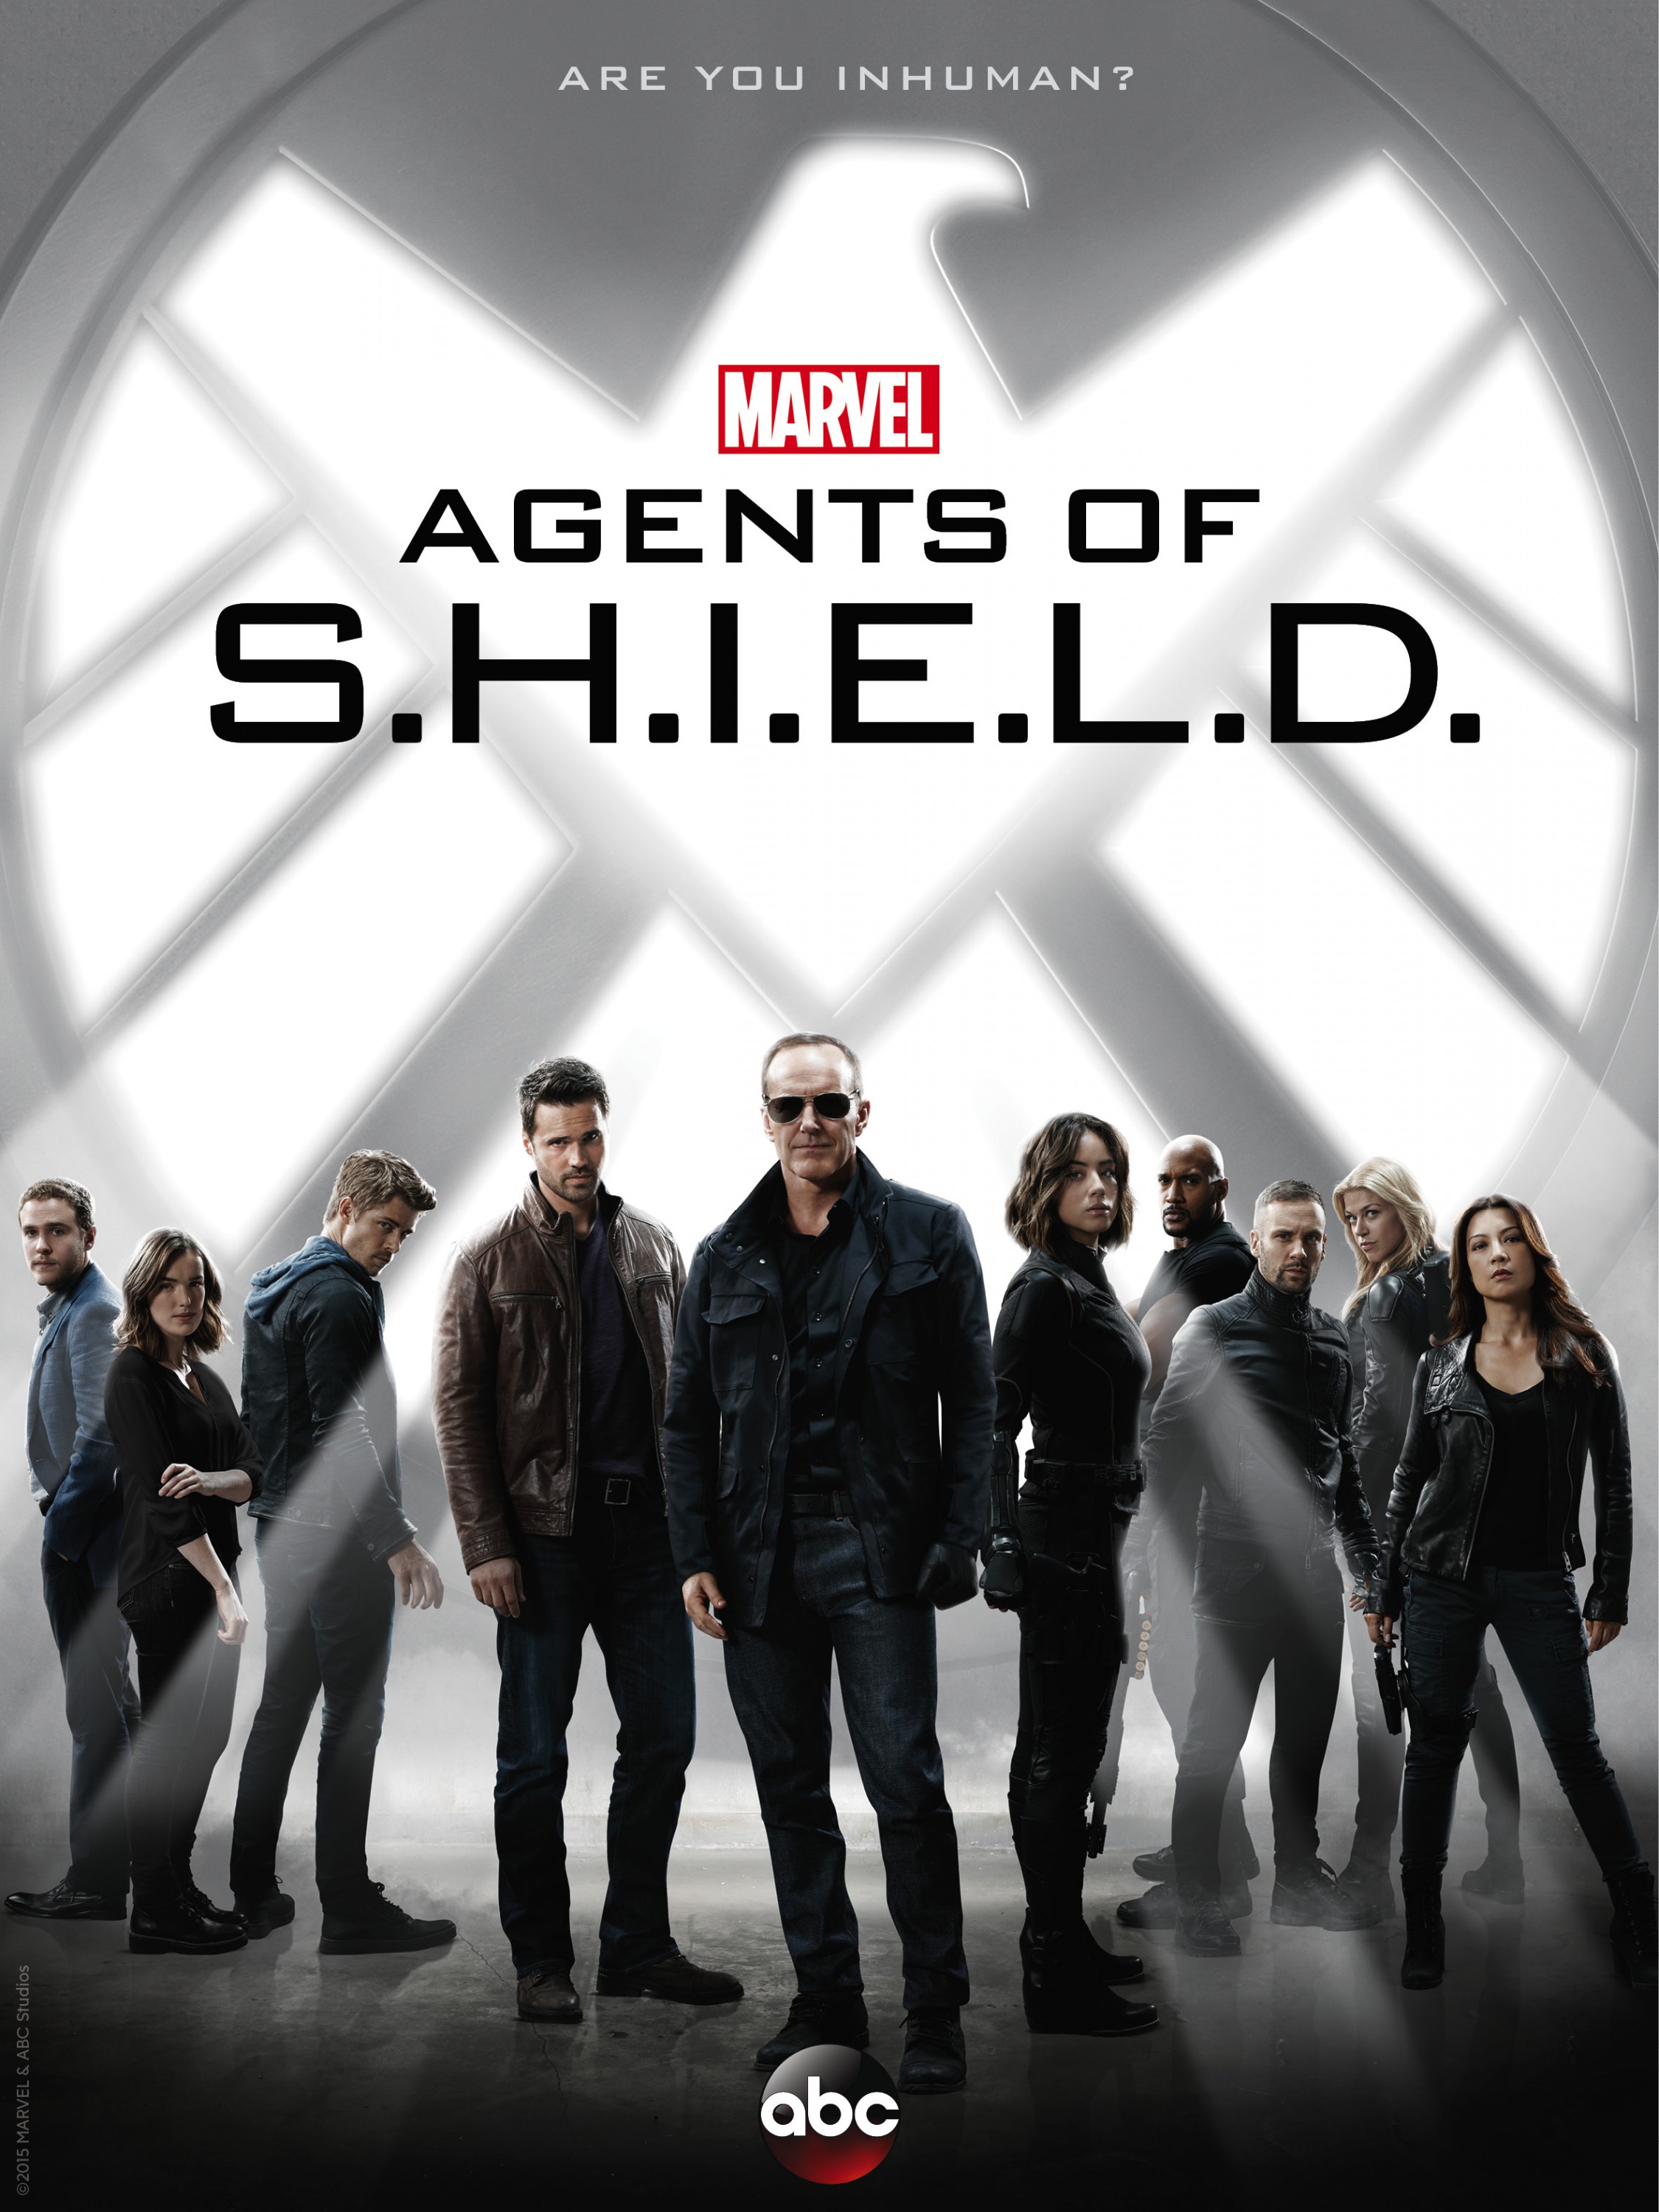 marvel agents of shield season 1 full episodes download